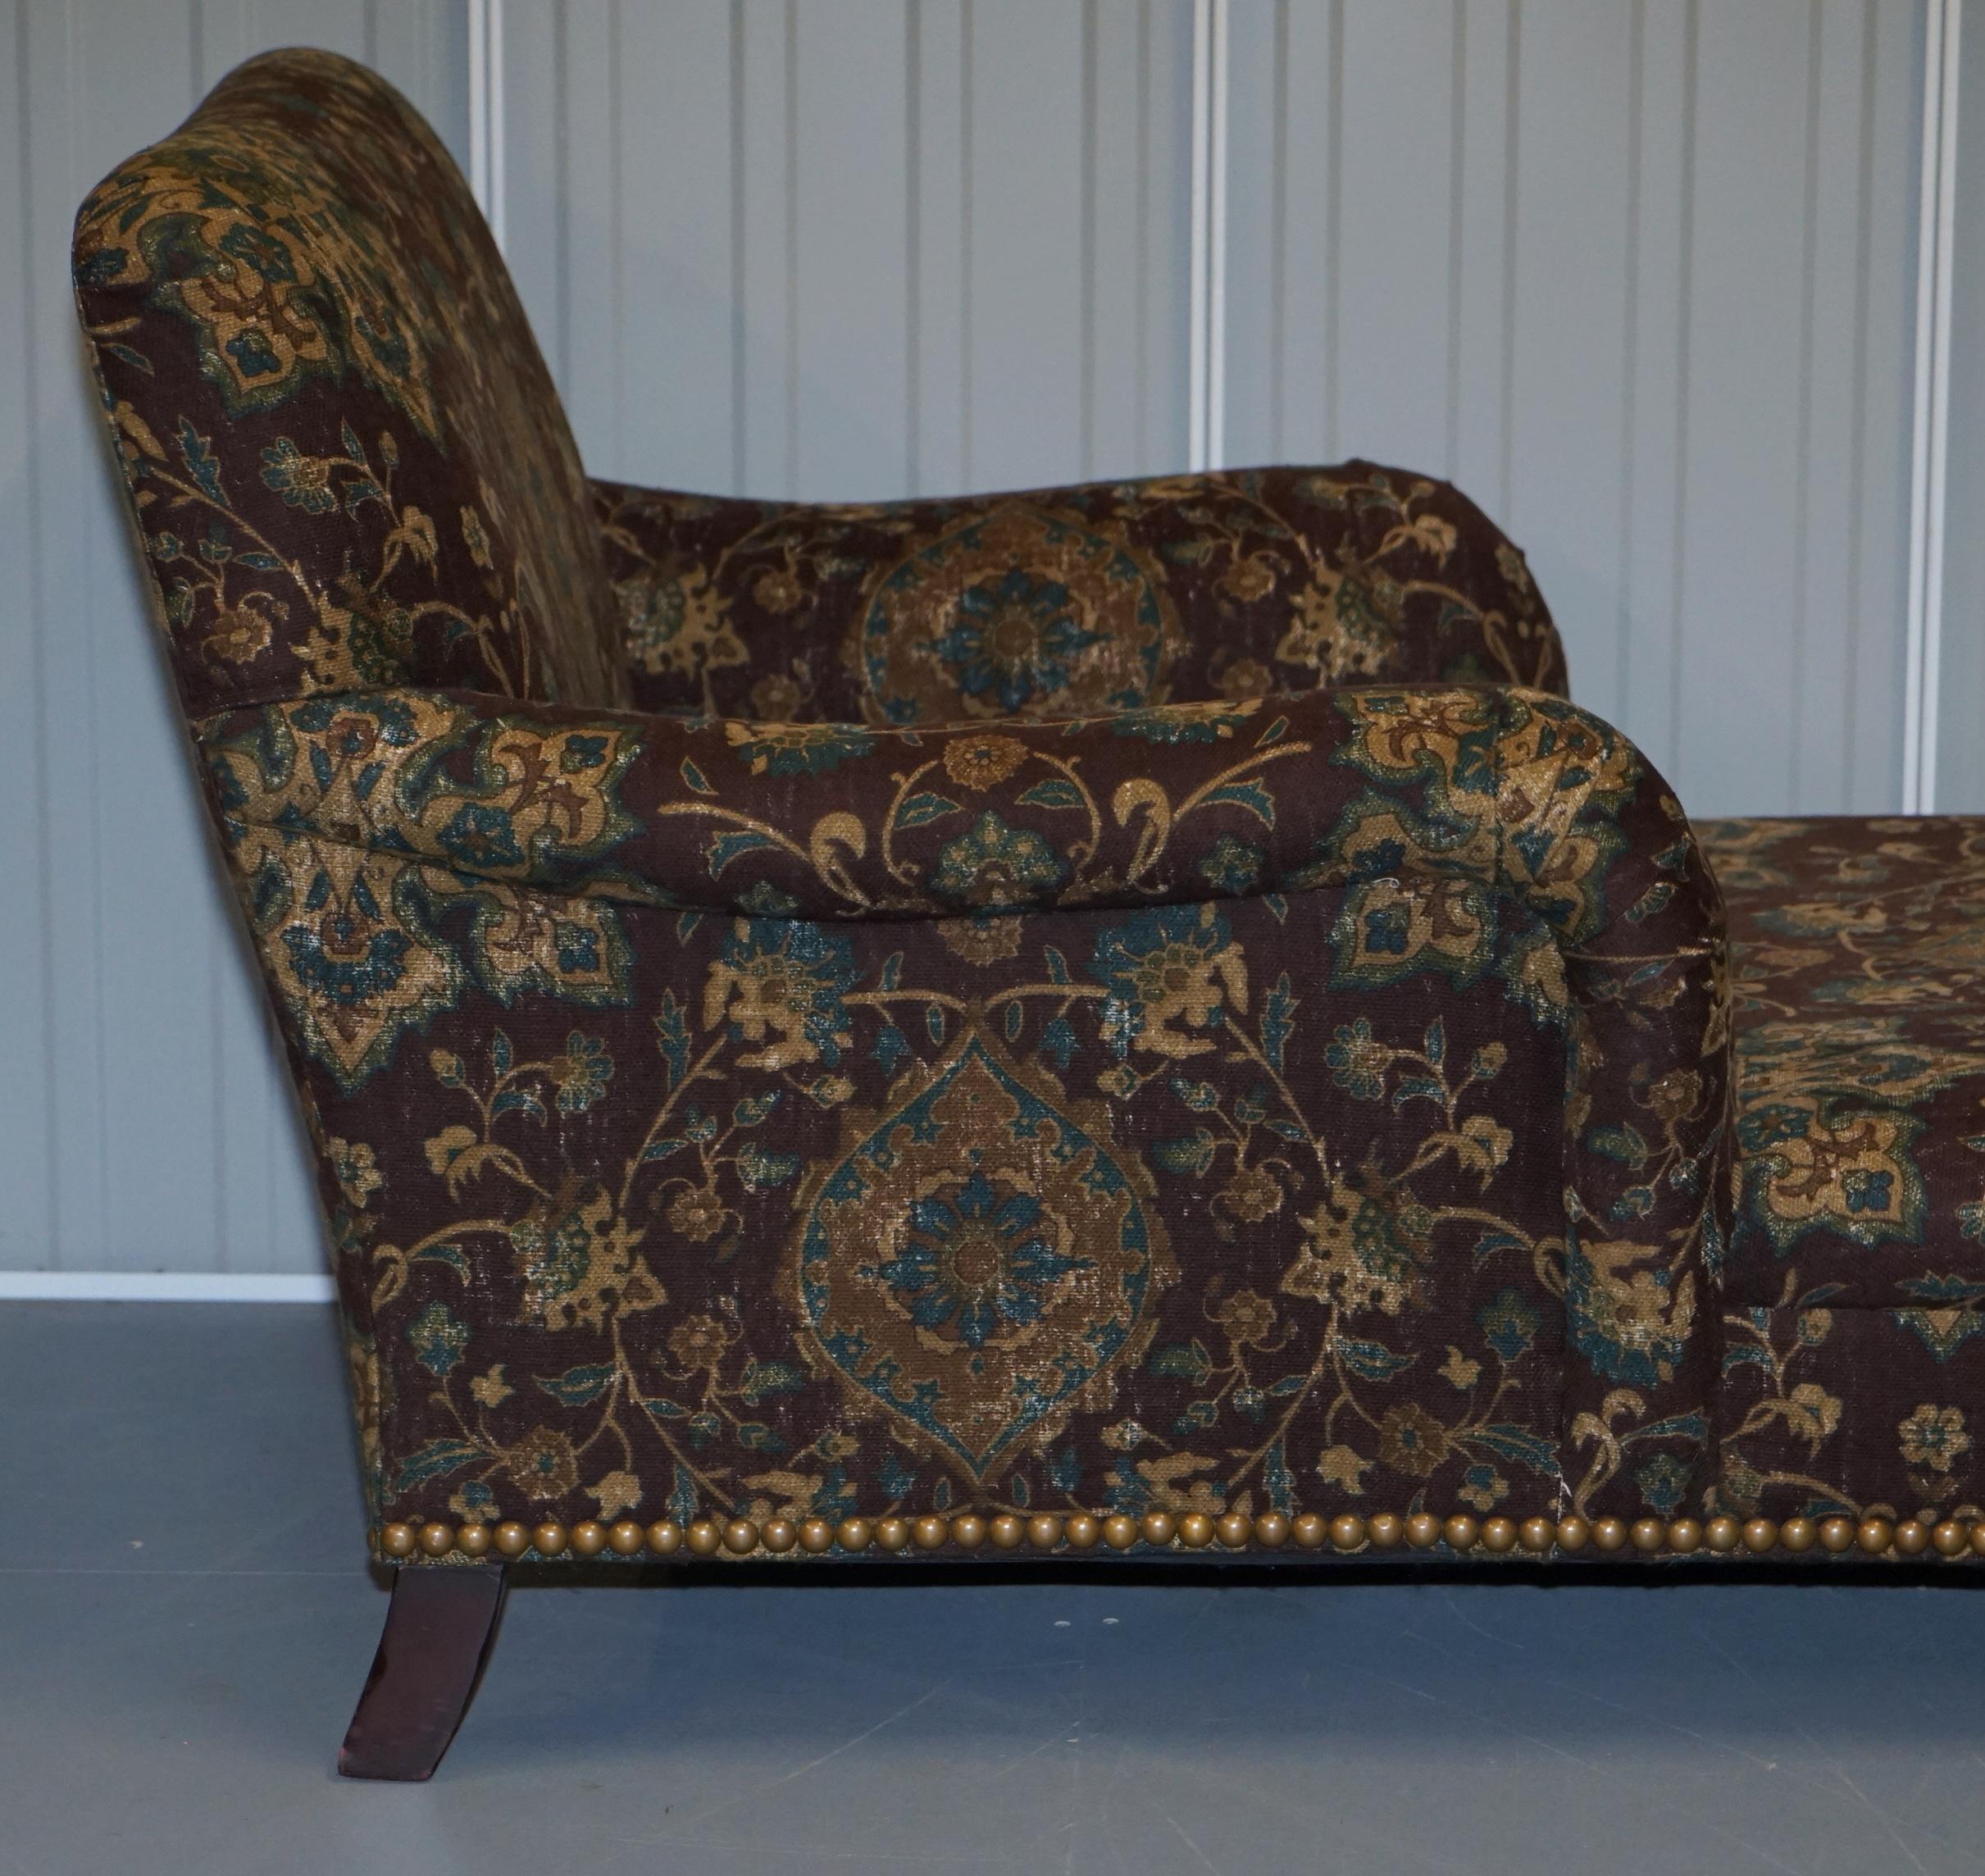 Large Oversized Ralph Lauren Chaise Lounge Sofa Armchair Floral Upholstery 7